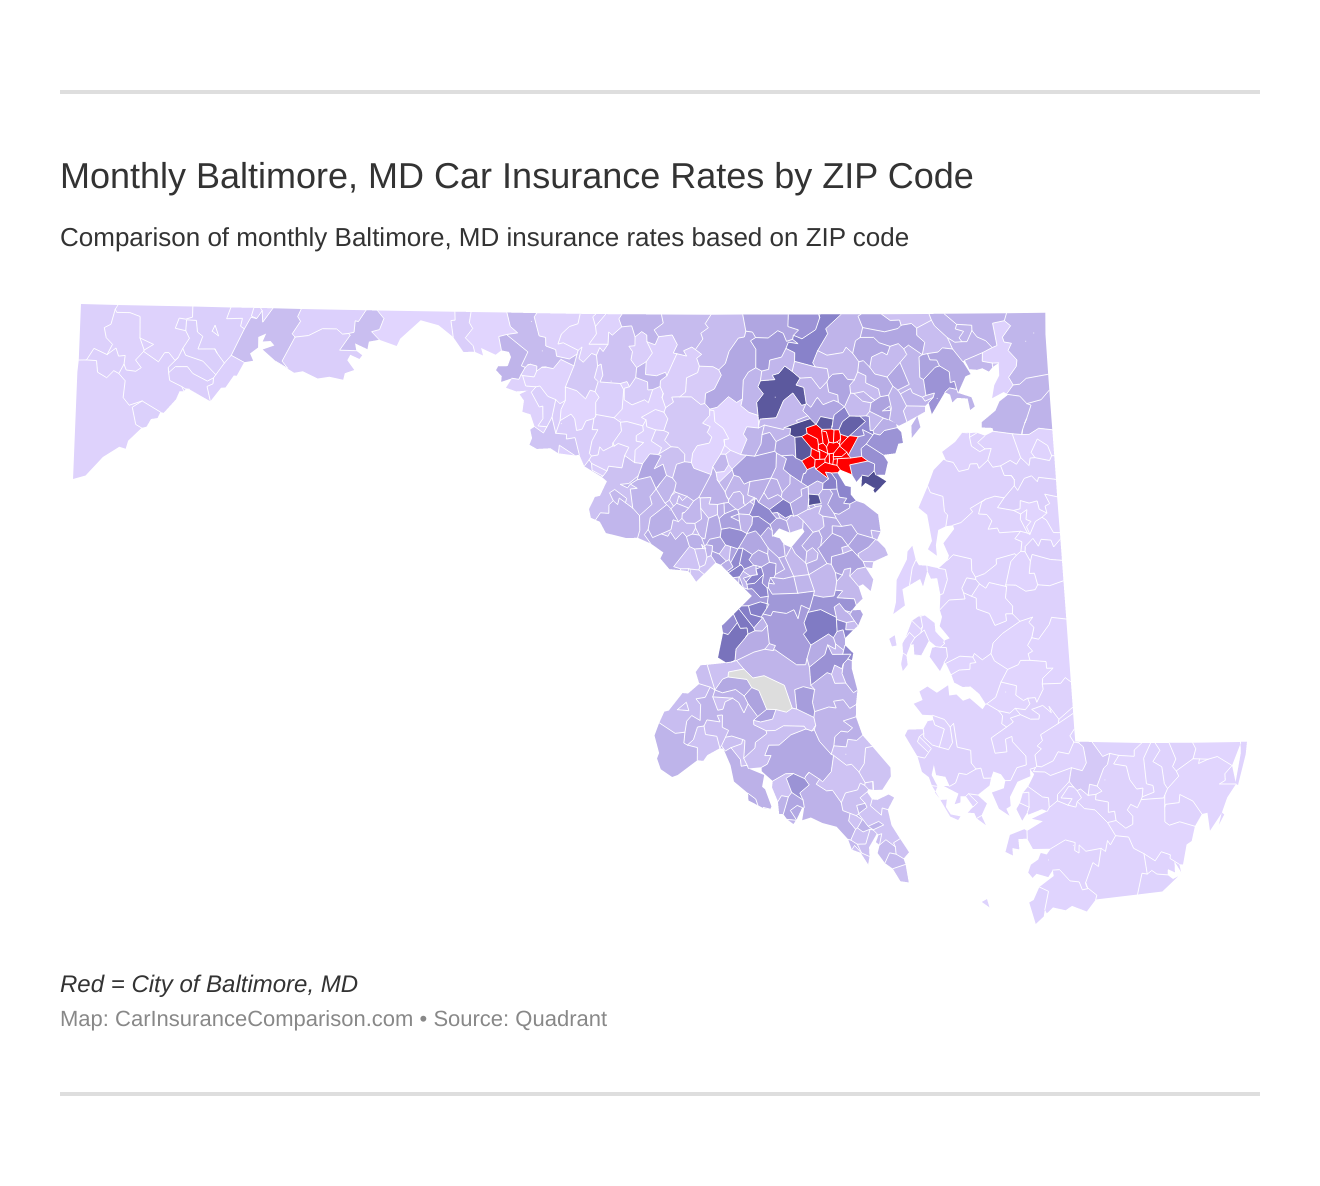 Monthly Baltimore, MD Car Insurance Rates by ZIP Code